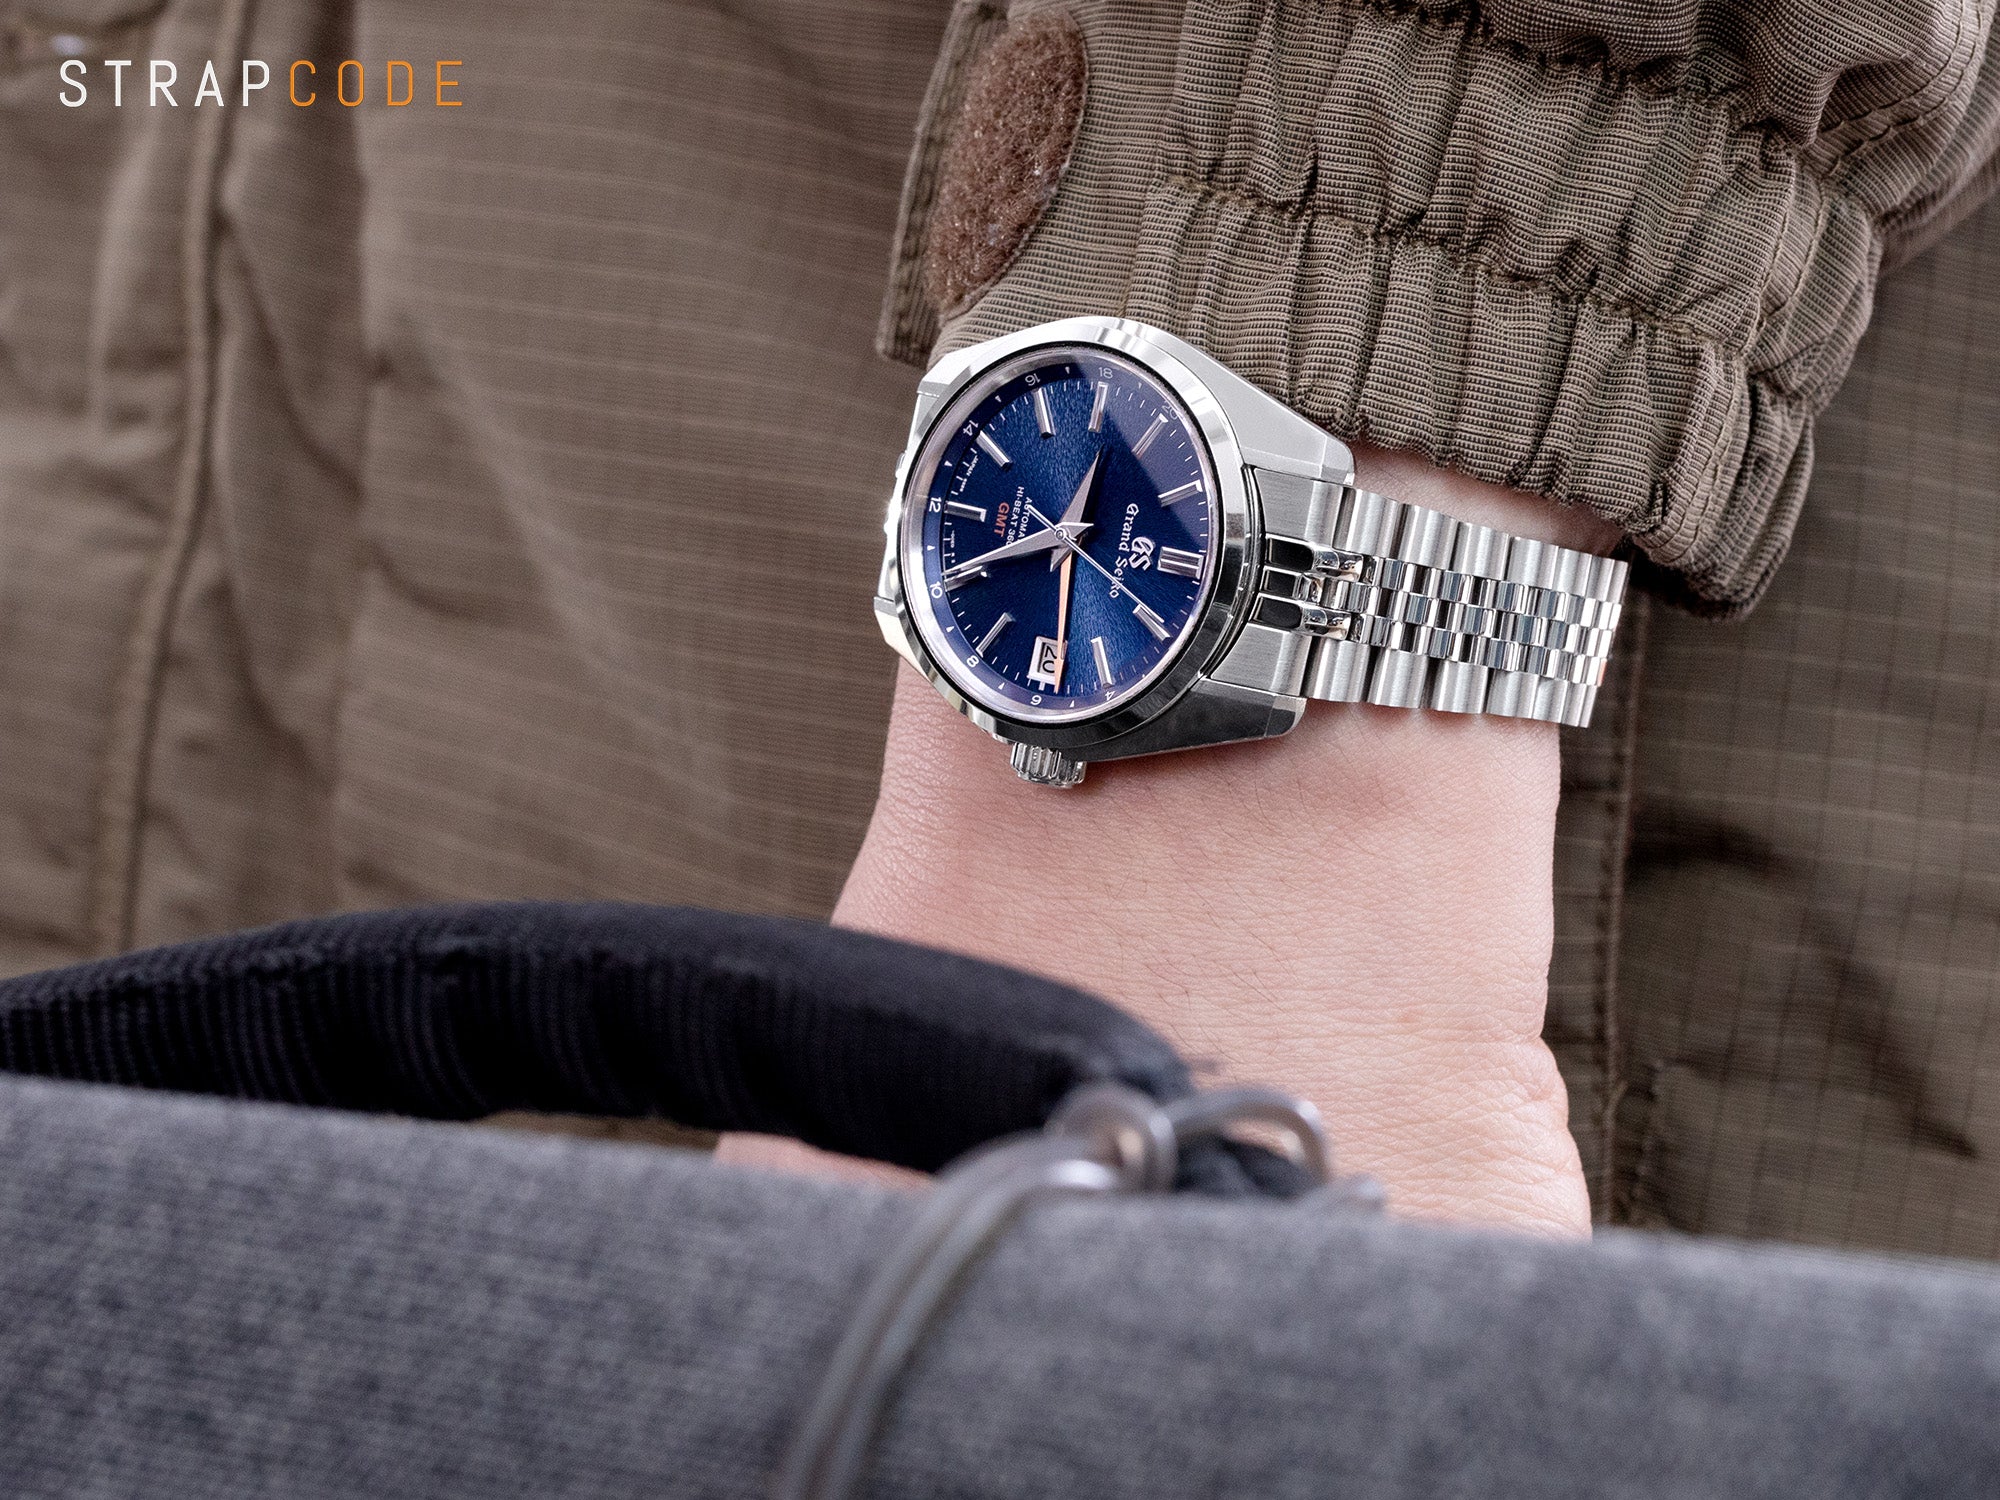 Travel with your watch Grand Seiko Boutique Limited Edition SBGJ235 by Strapcode watch bands